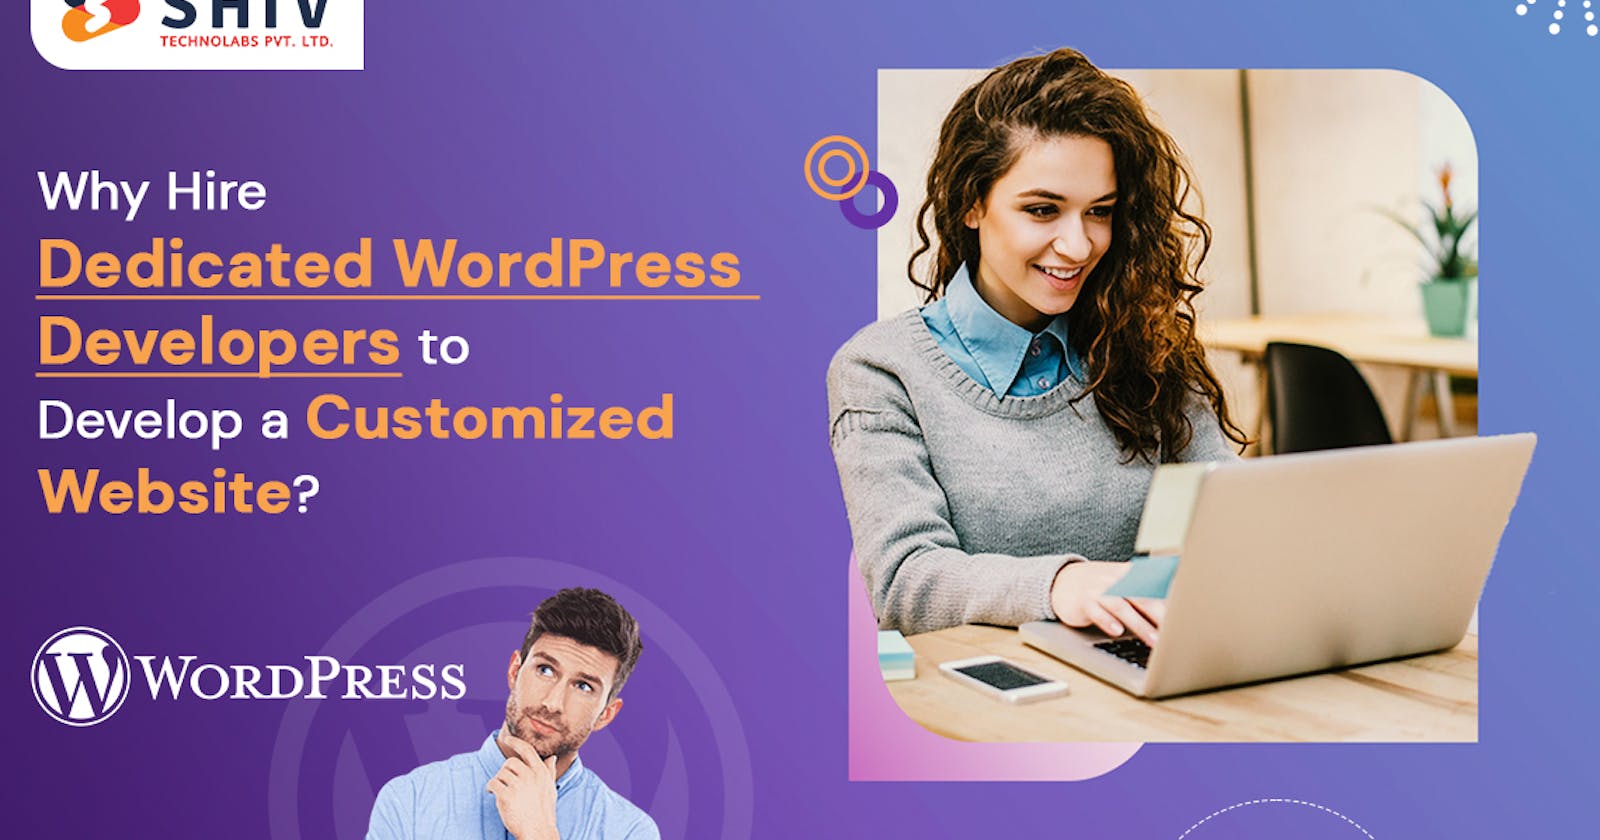 Why Hire Dedicated WordPress Developers to Develop a Customized Website?